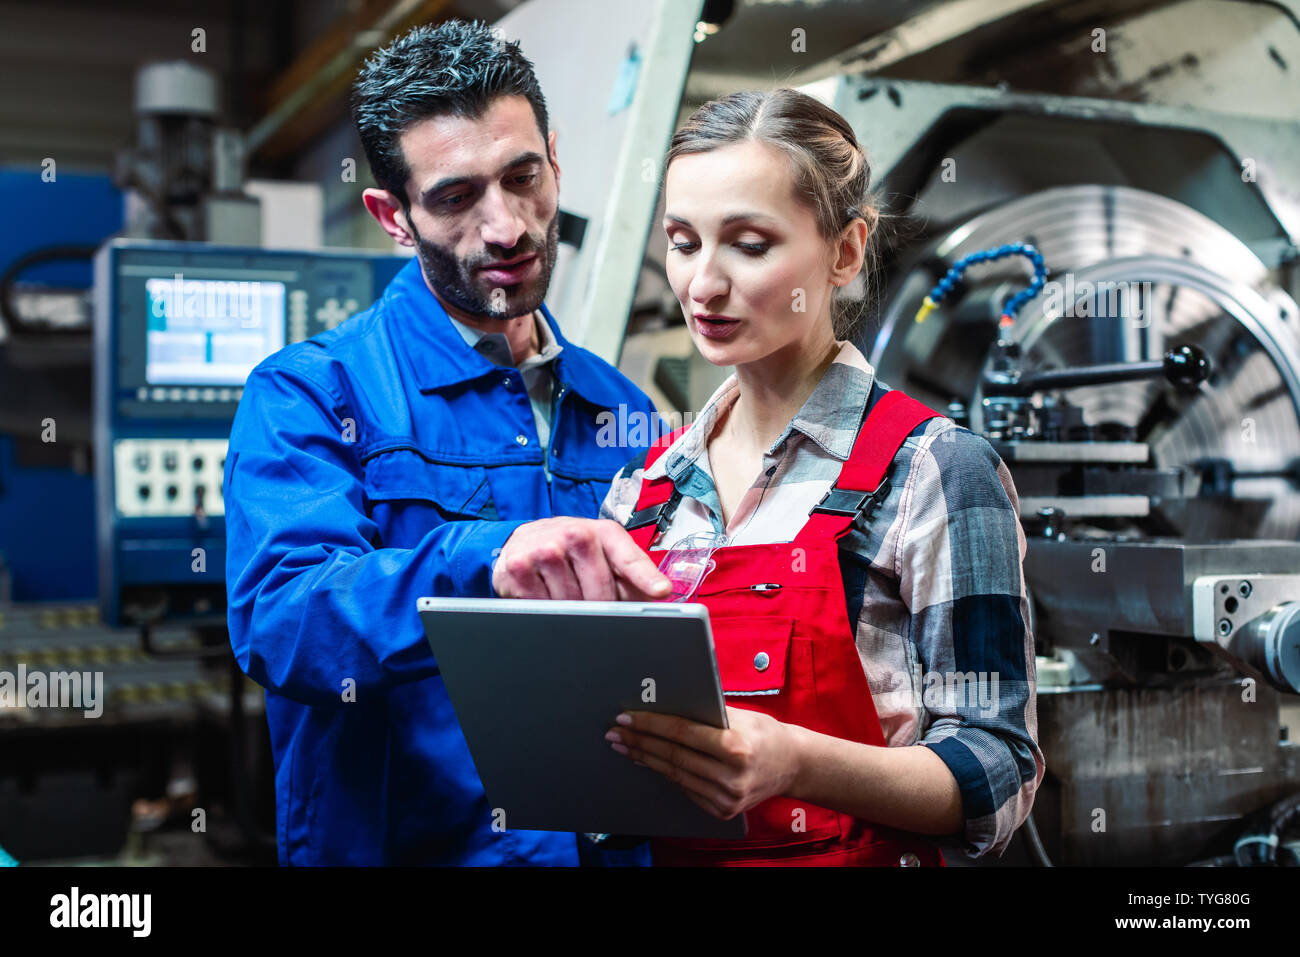 Woman and man manufacturing worker in discussion  Stock Photo